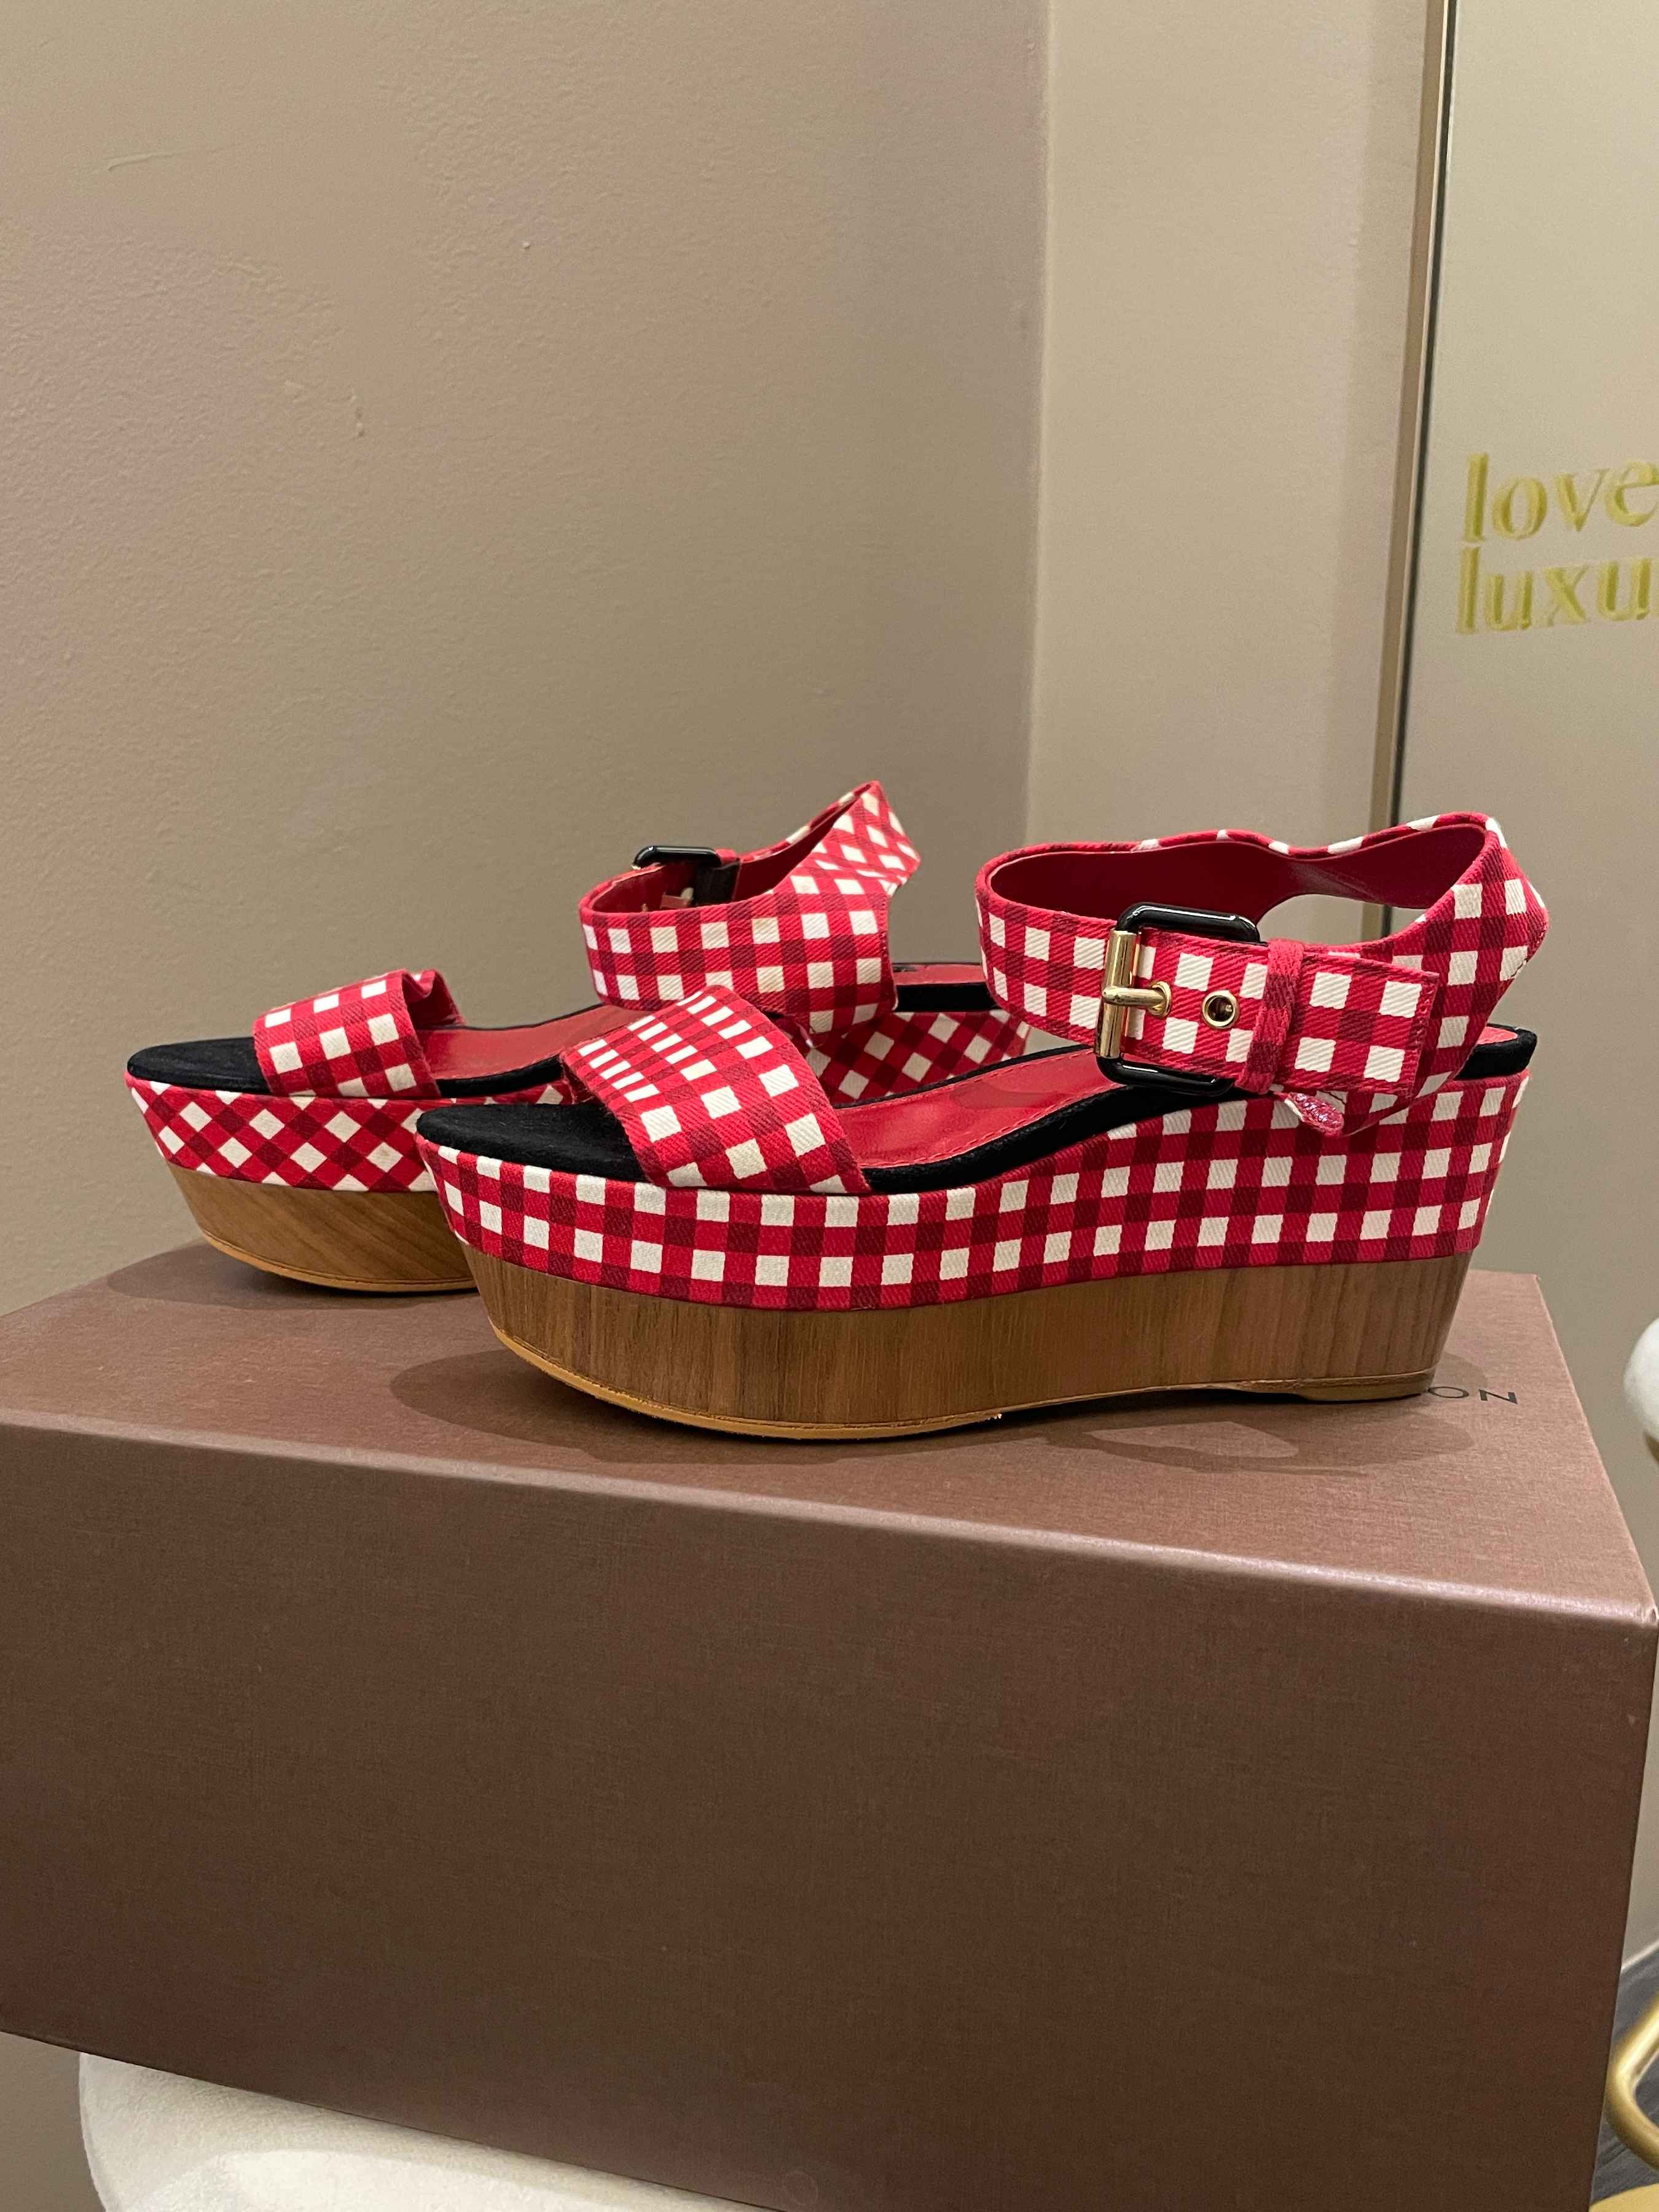 Louis Vuitton Wedge Sandals Red / White Size 37